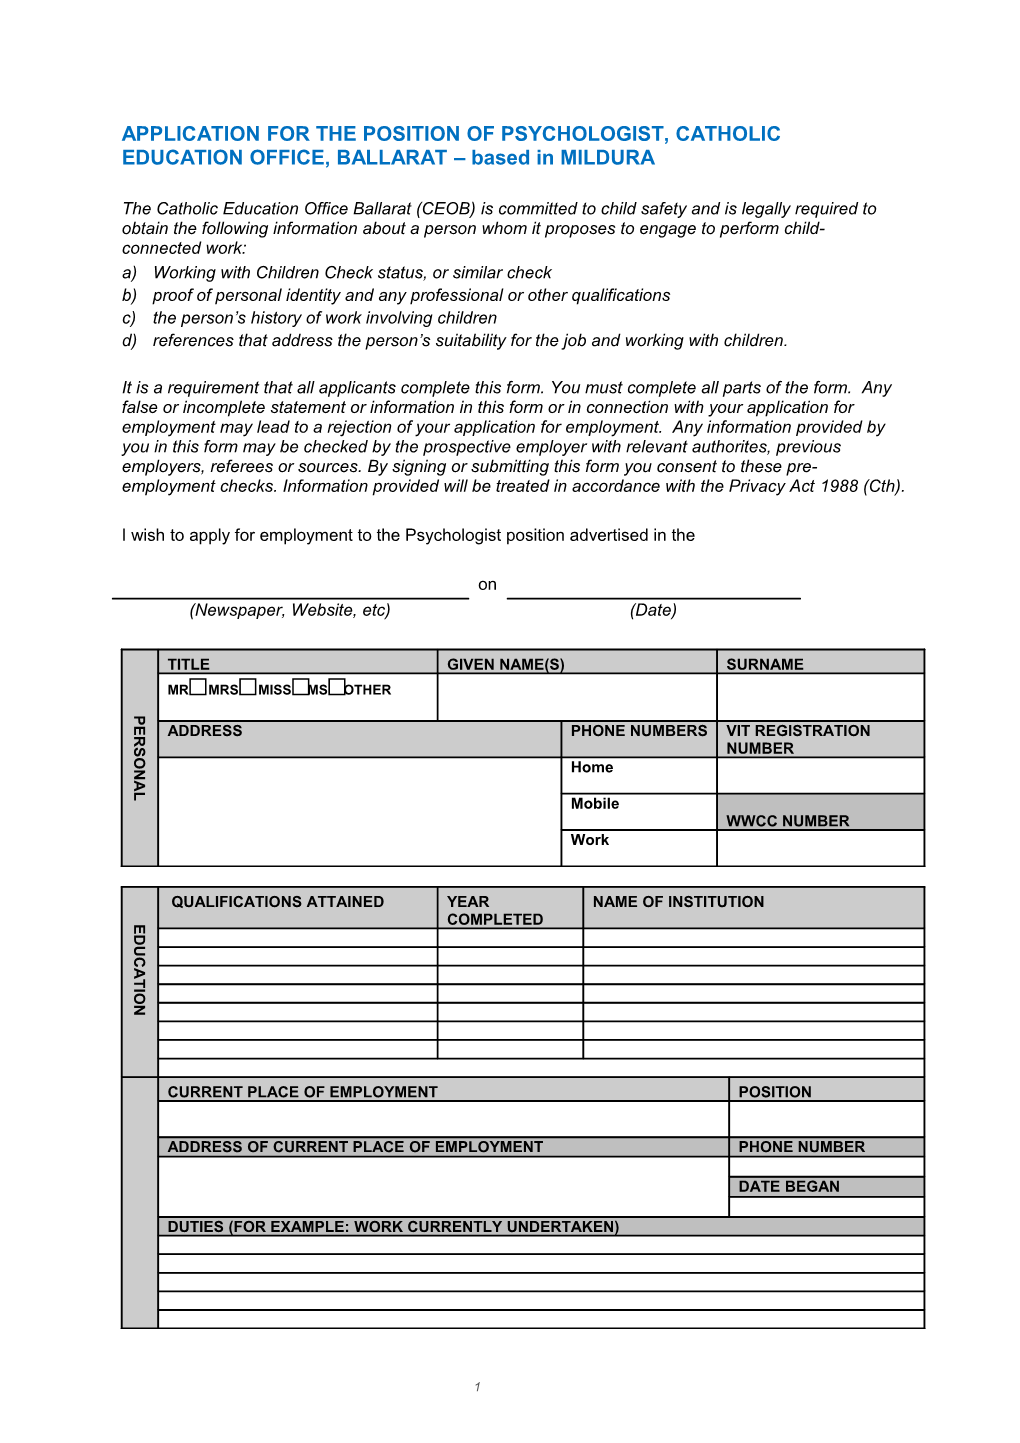 Application for Employment Teaching Position